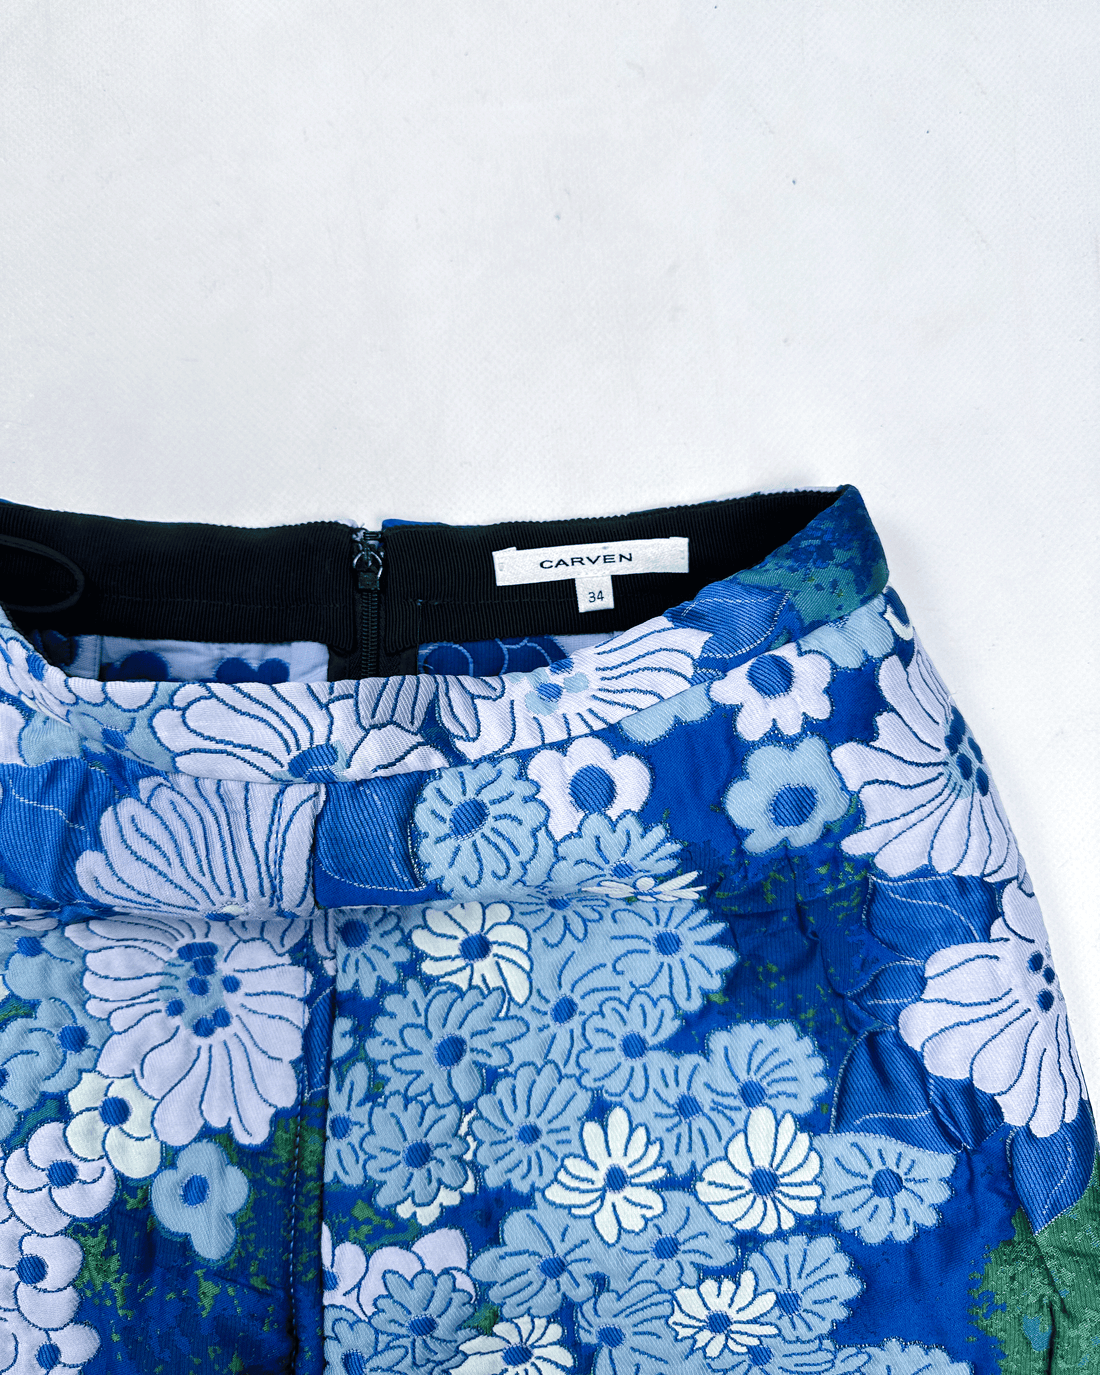 Carven 3-D Embroidery Print Skirt 2000's